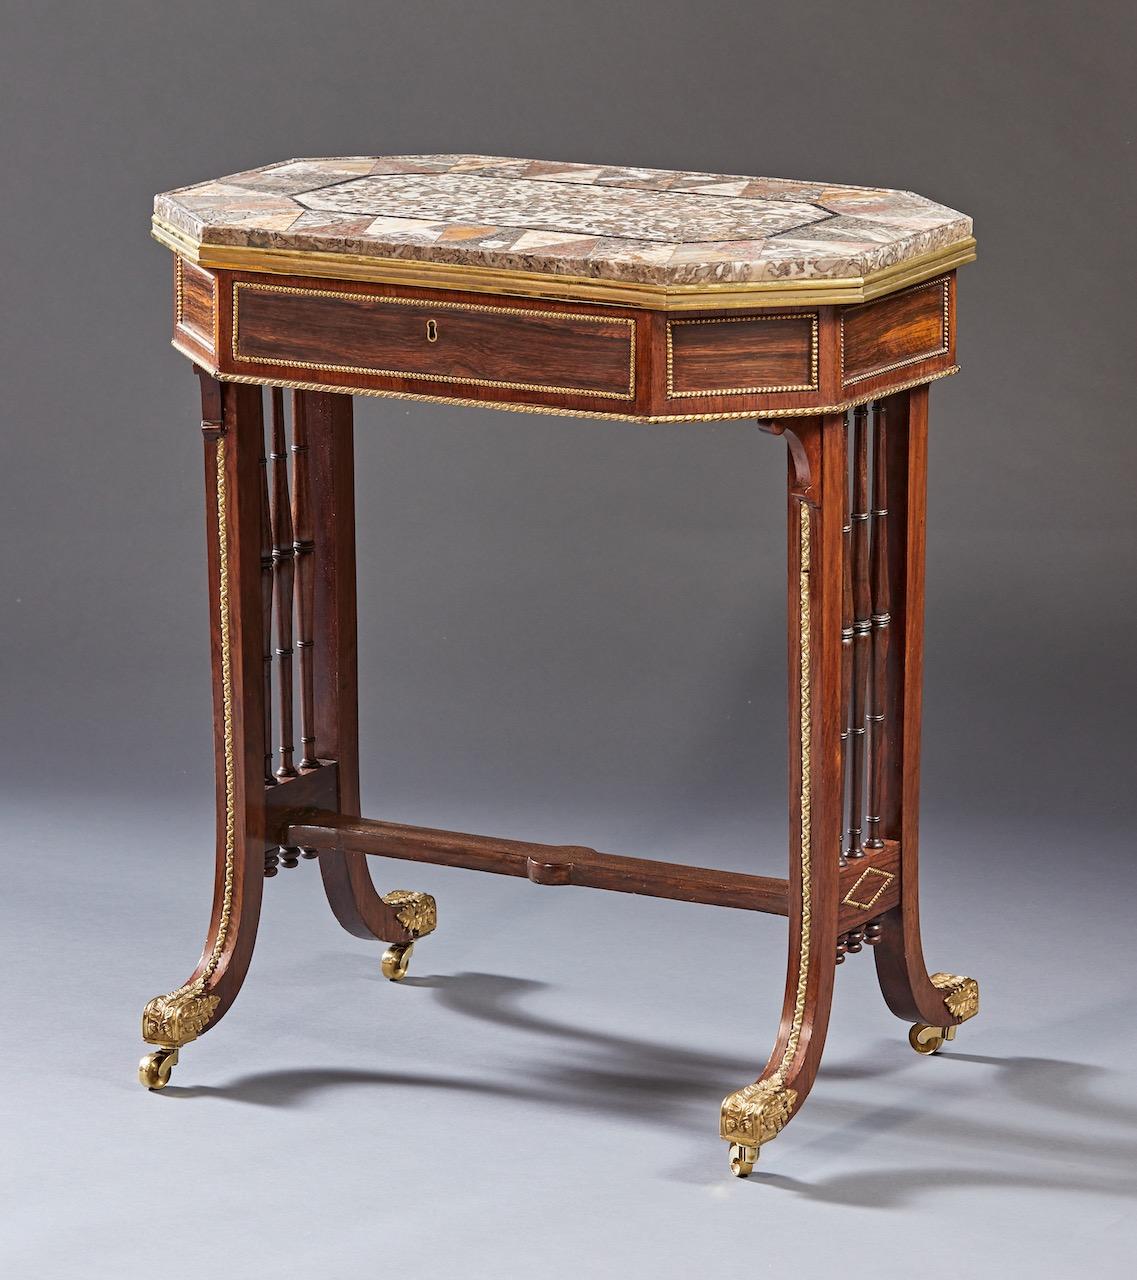 Rare English Regency Period Specimen Marble Table Attributed to Gillows In Good Condition For Sale In Woodbury, CT